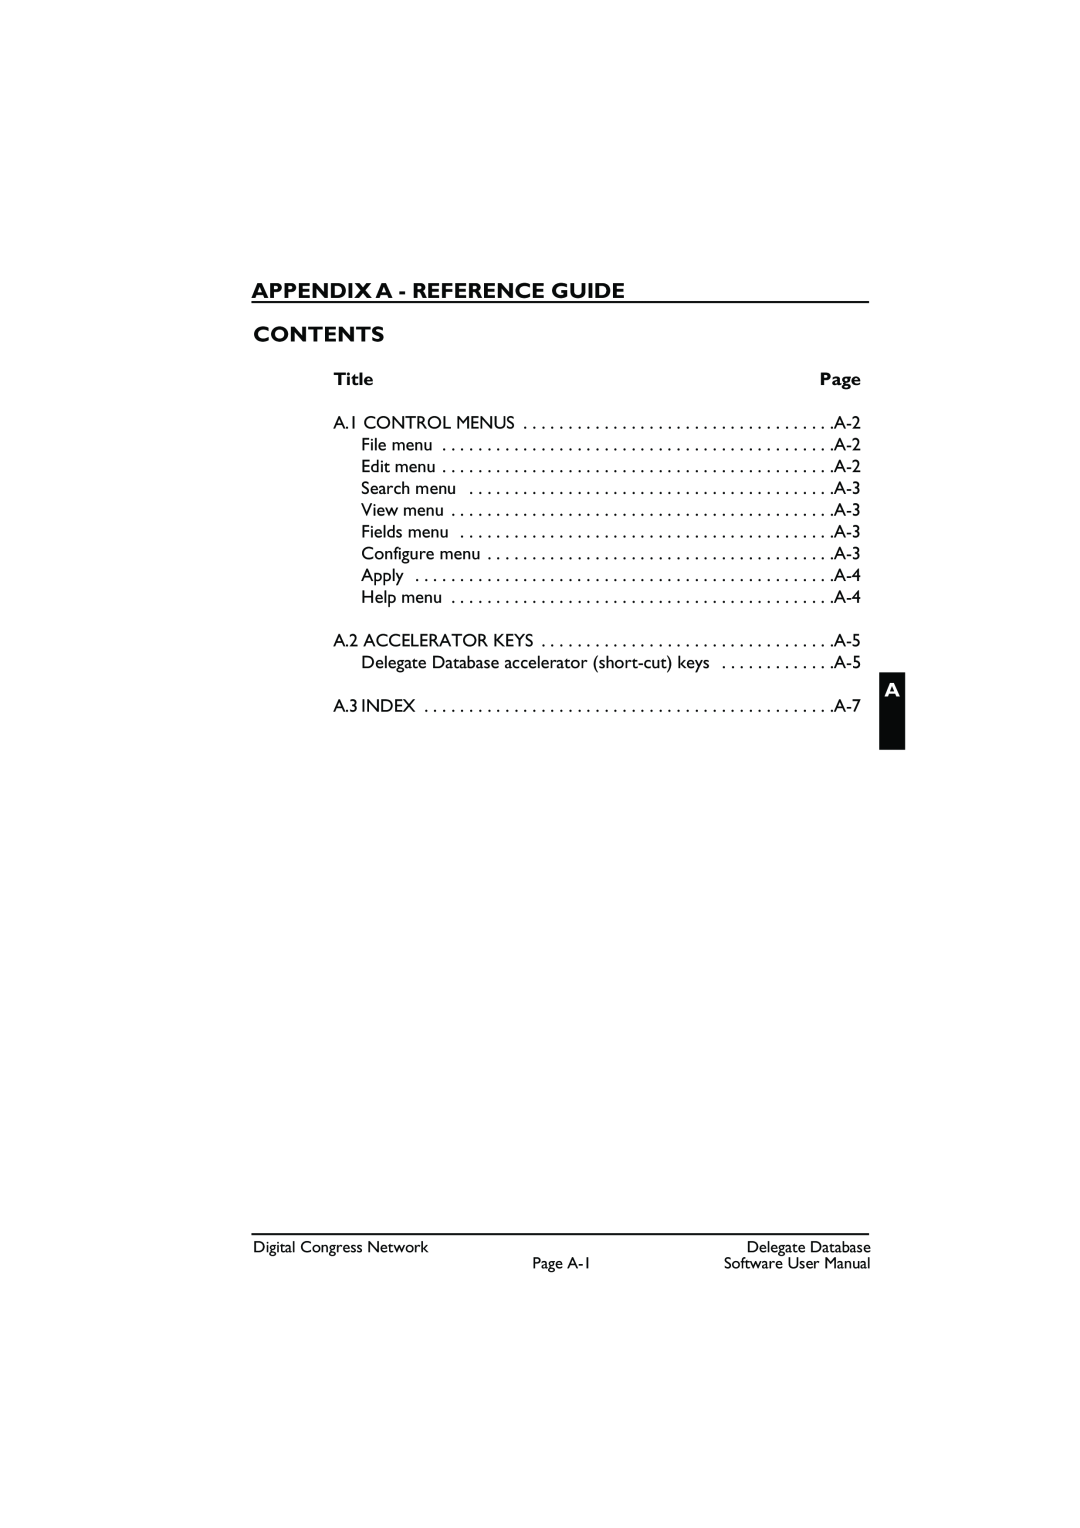 Bosch Appliances LBB3580 user manual Appendix A - Reference Guide Contents, Title, Page 